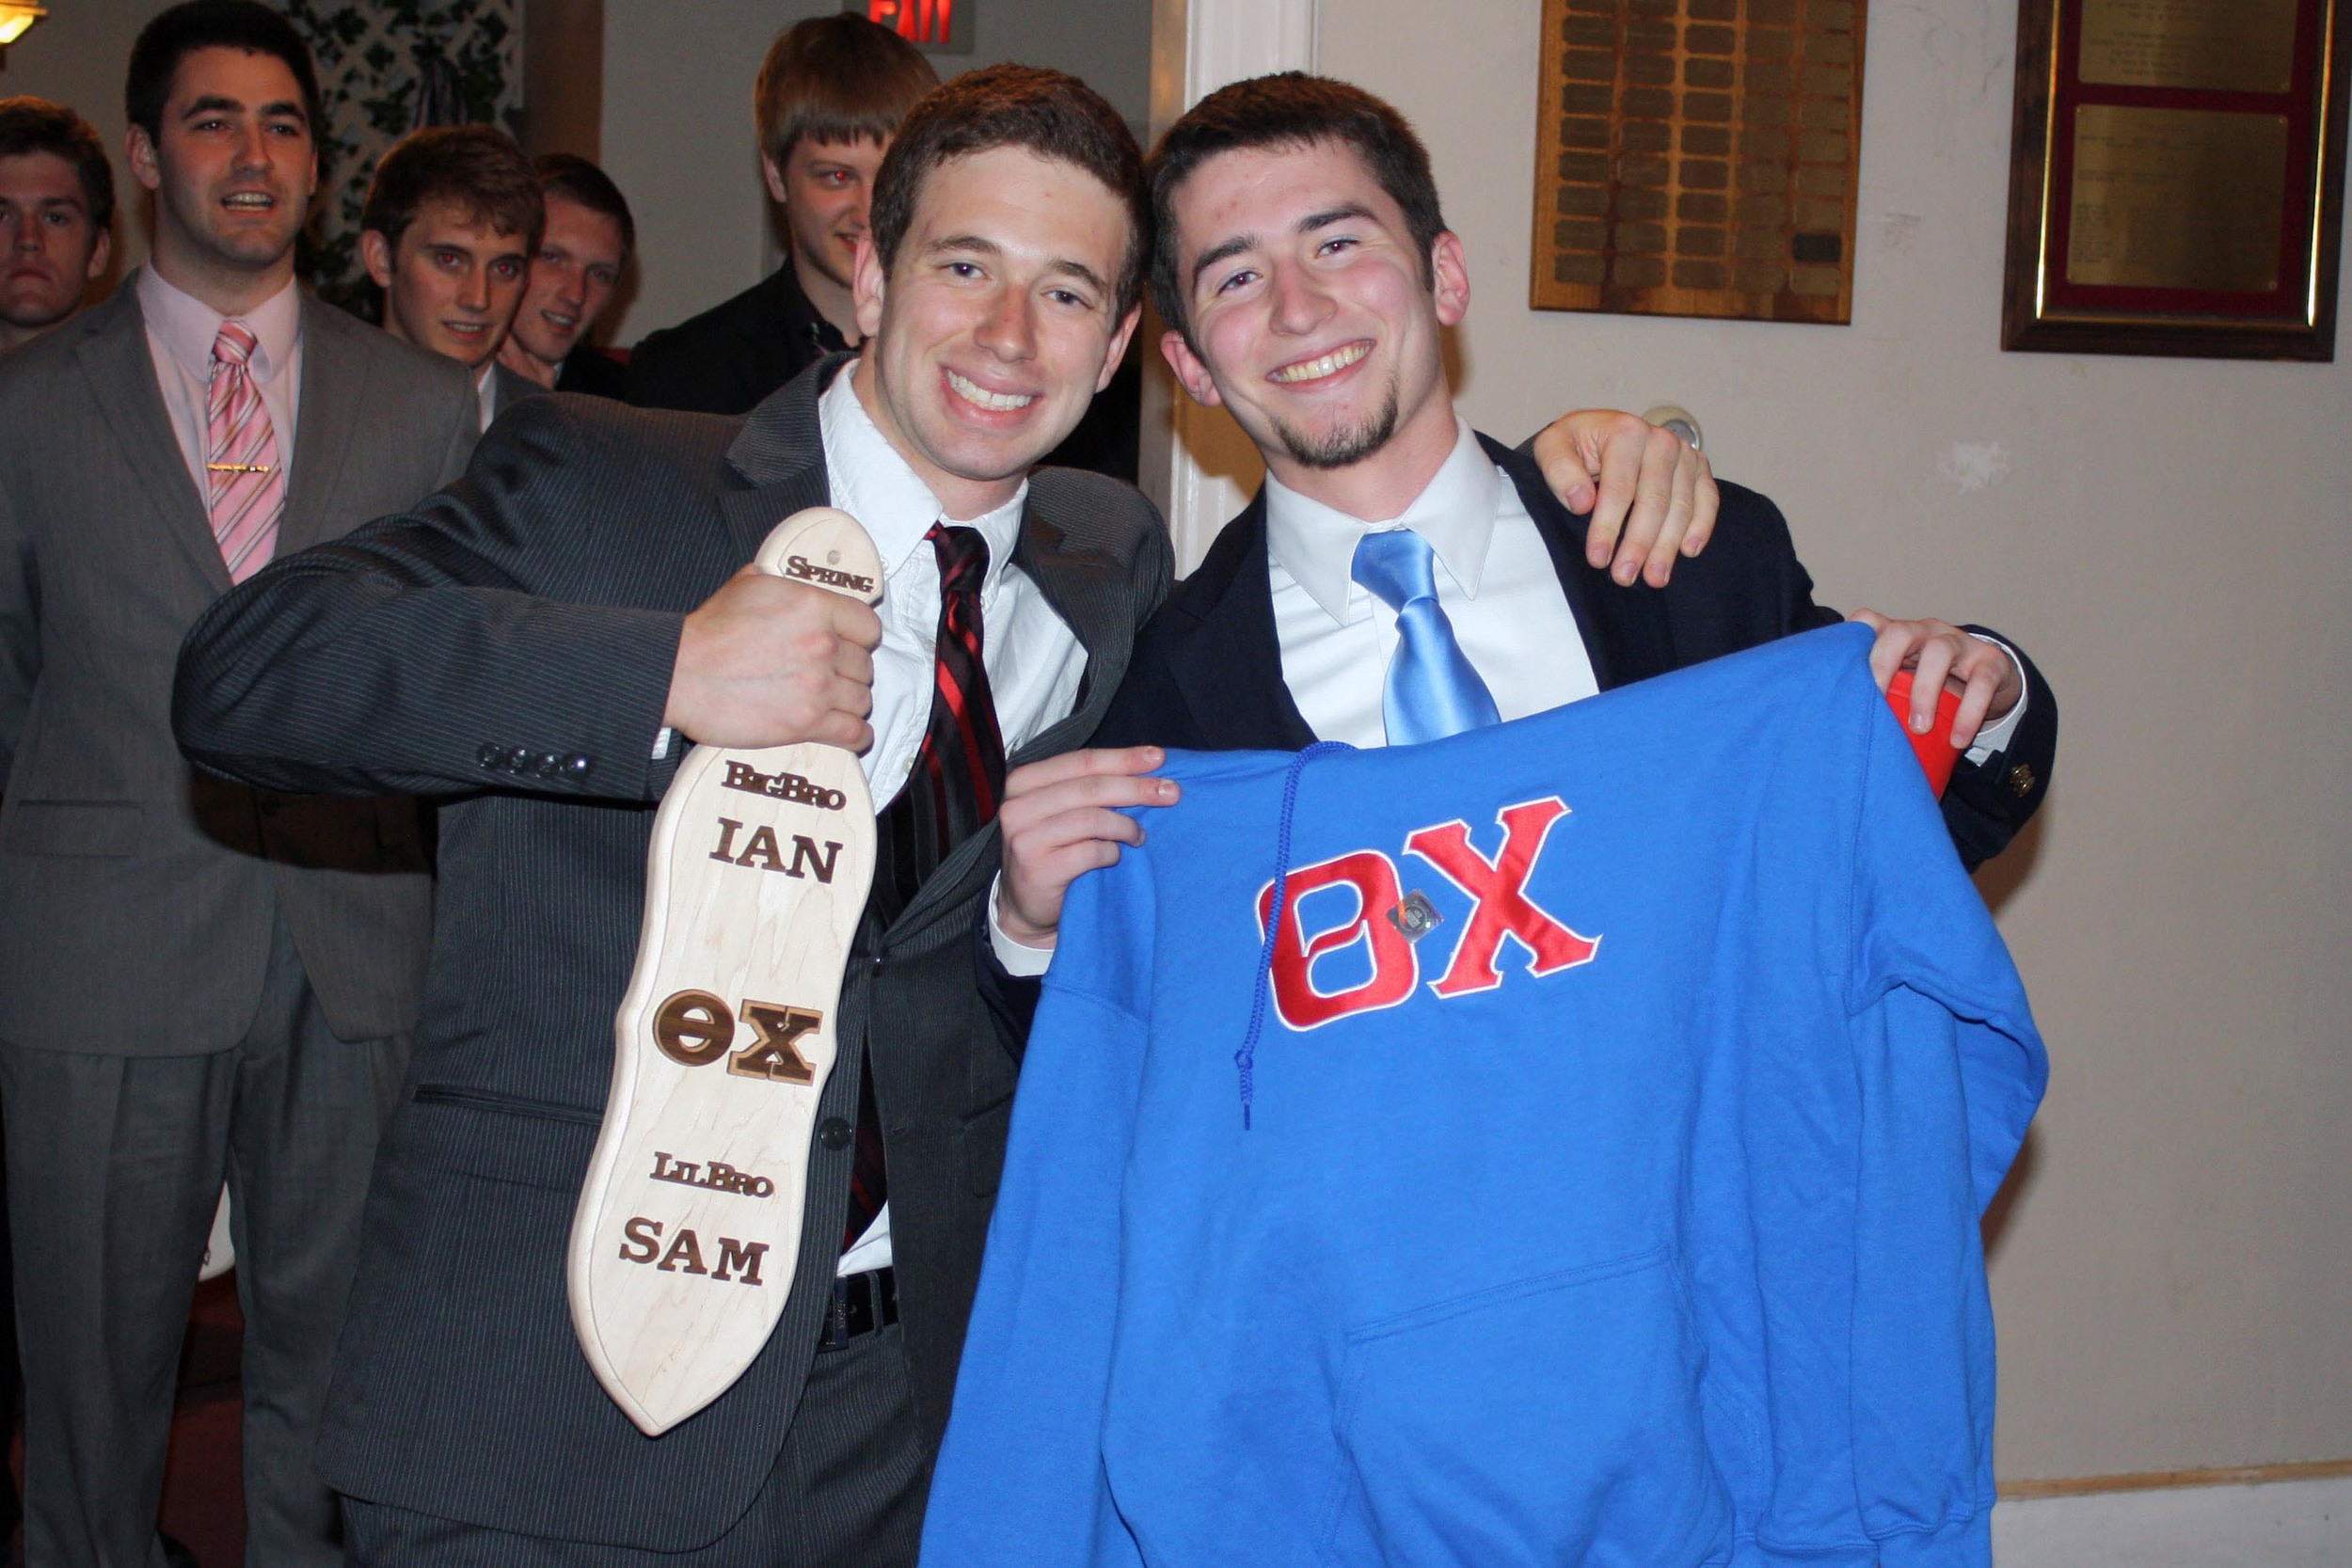  Big Brother Ian Brodsky (L) and Little Brother Sam Kulp
Spring 2012 Initiation Night 